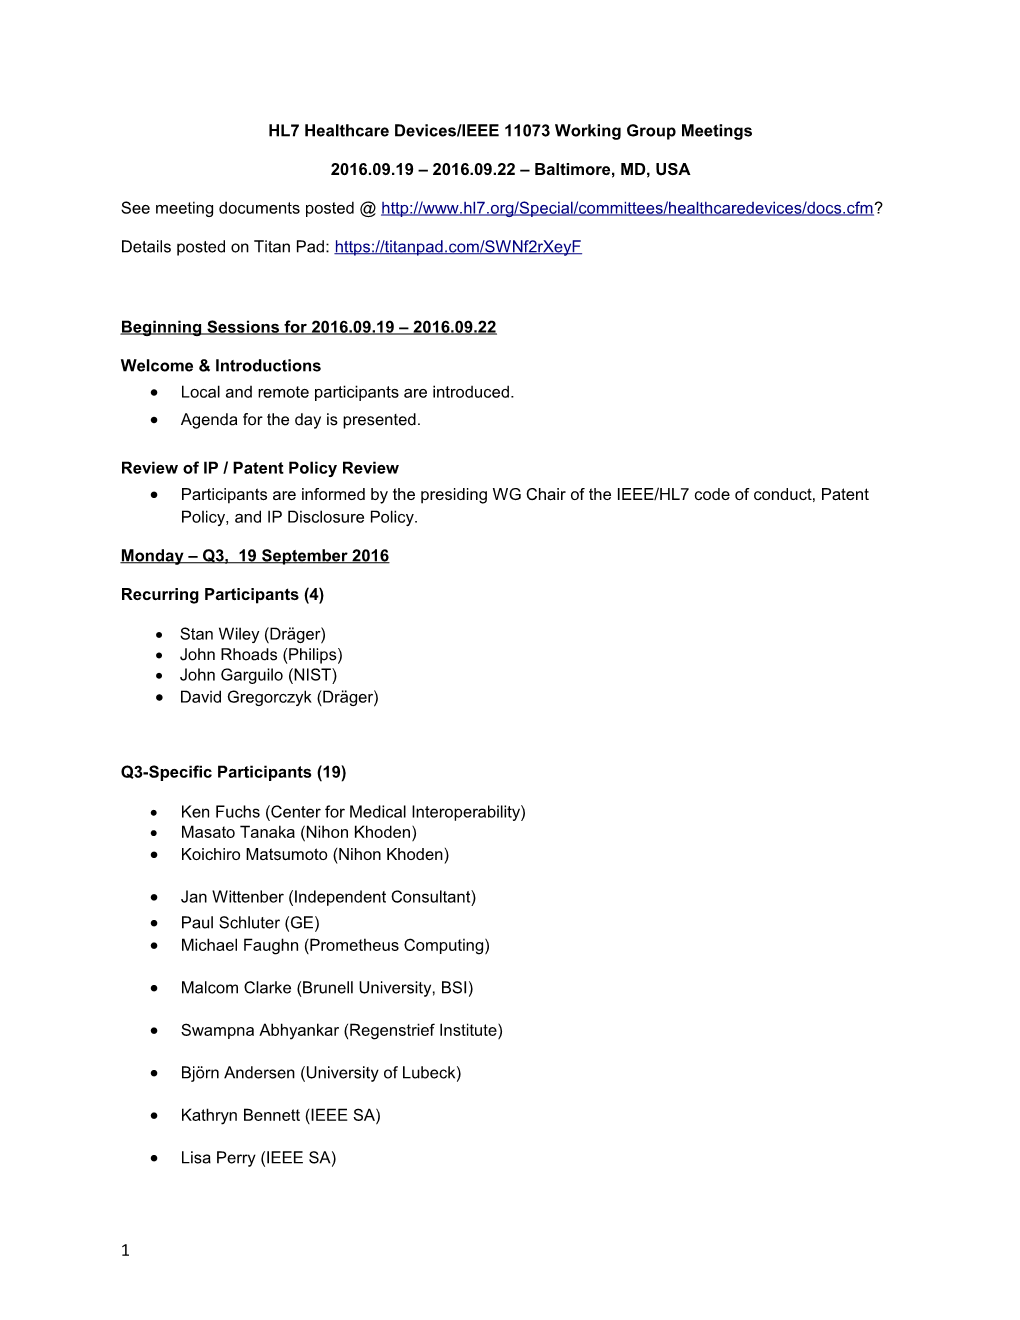 HL7 Healthcare Devices/IEEE 11073 Working Group Meetings s1